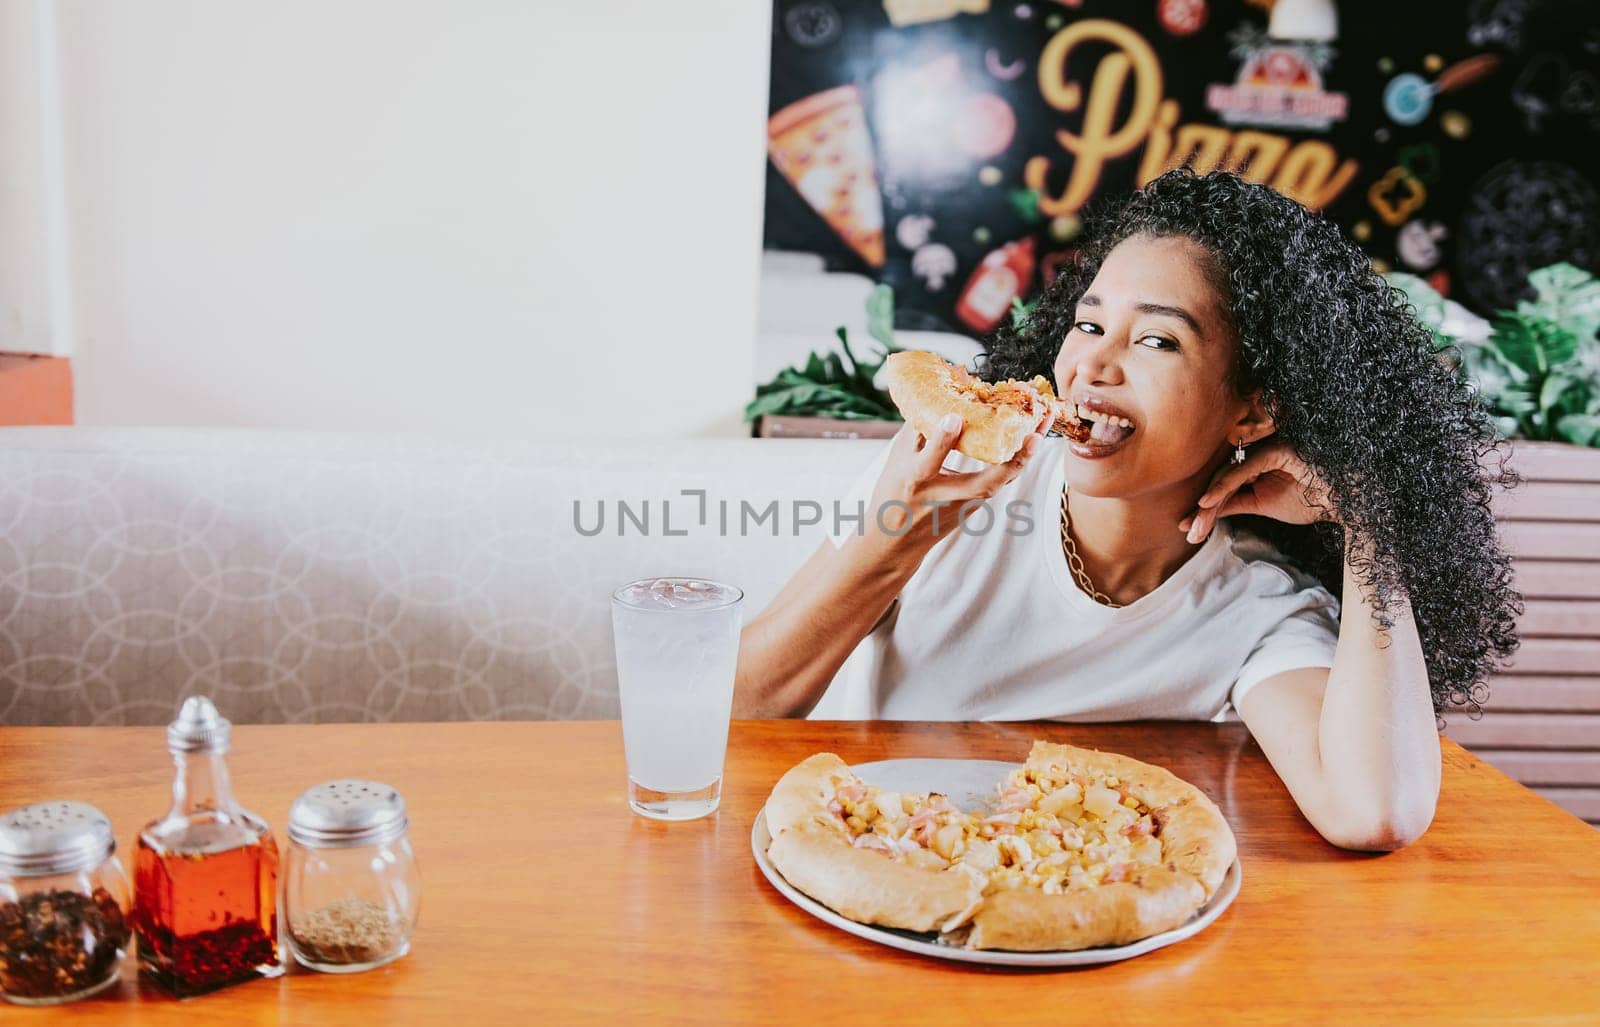 Smiling young woman enjoying a pizza in a restaurant. Happy afro hair girl eating pizza in a restaurant, eating and looking at camera